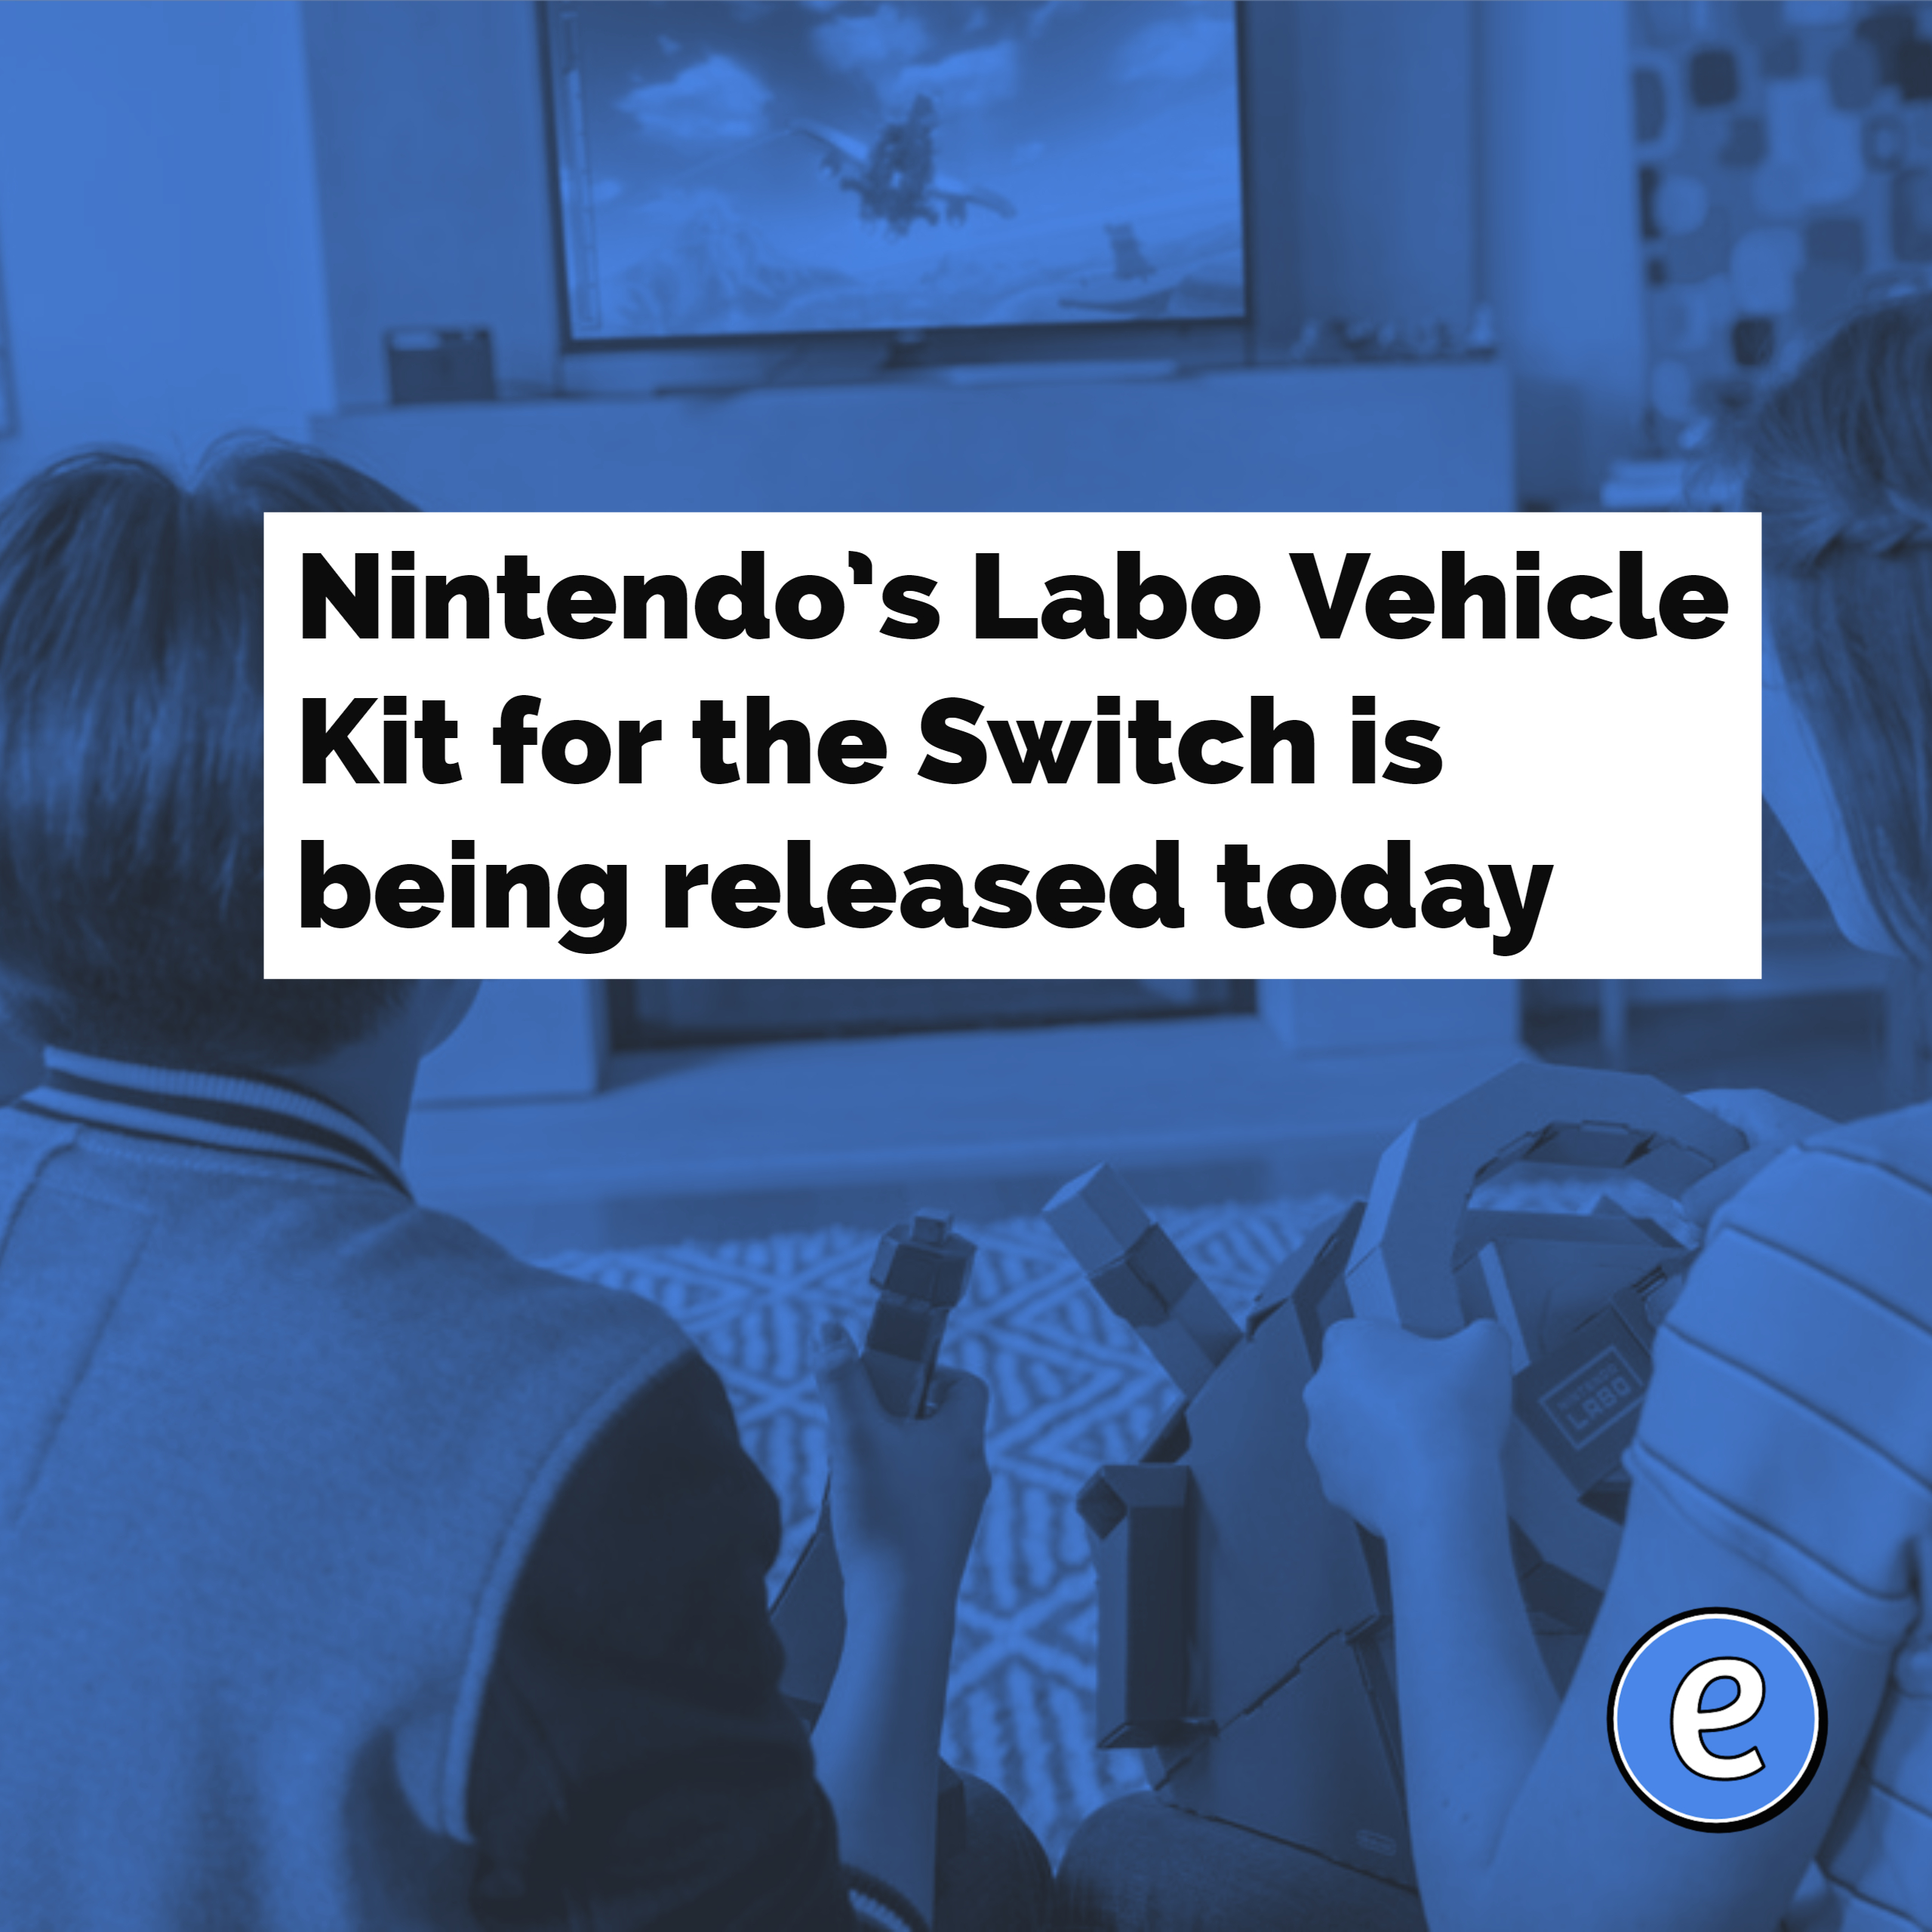 Nintendo’s Labo Vehicle Kit for the Switch is being released today